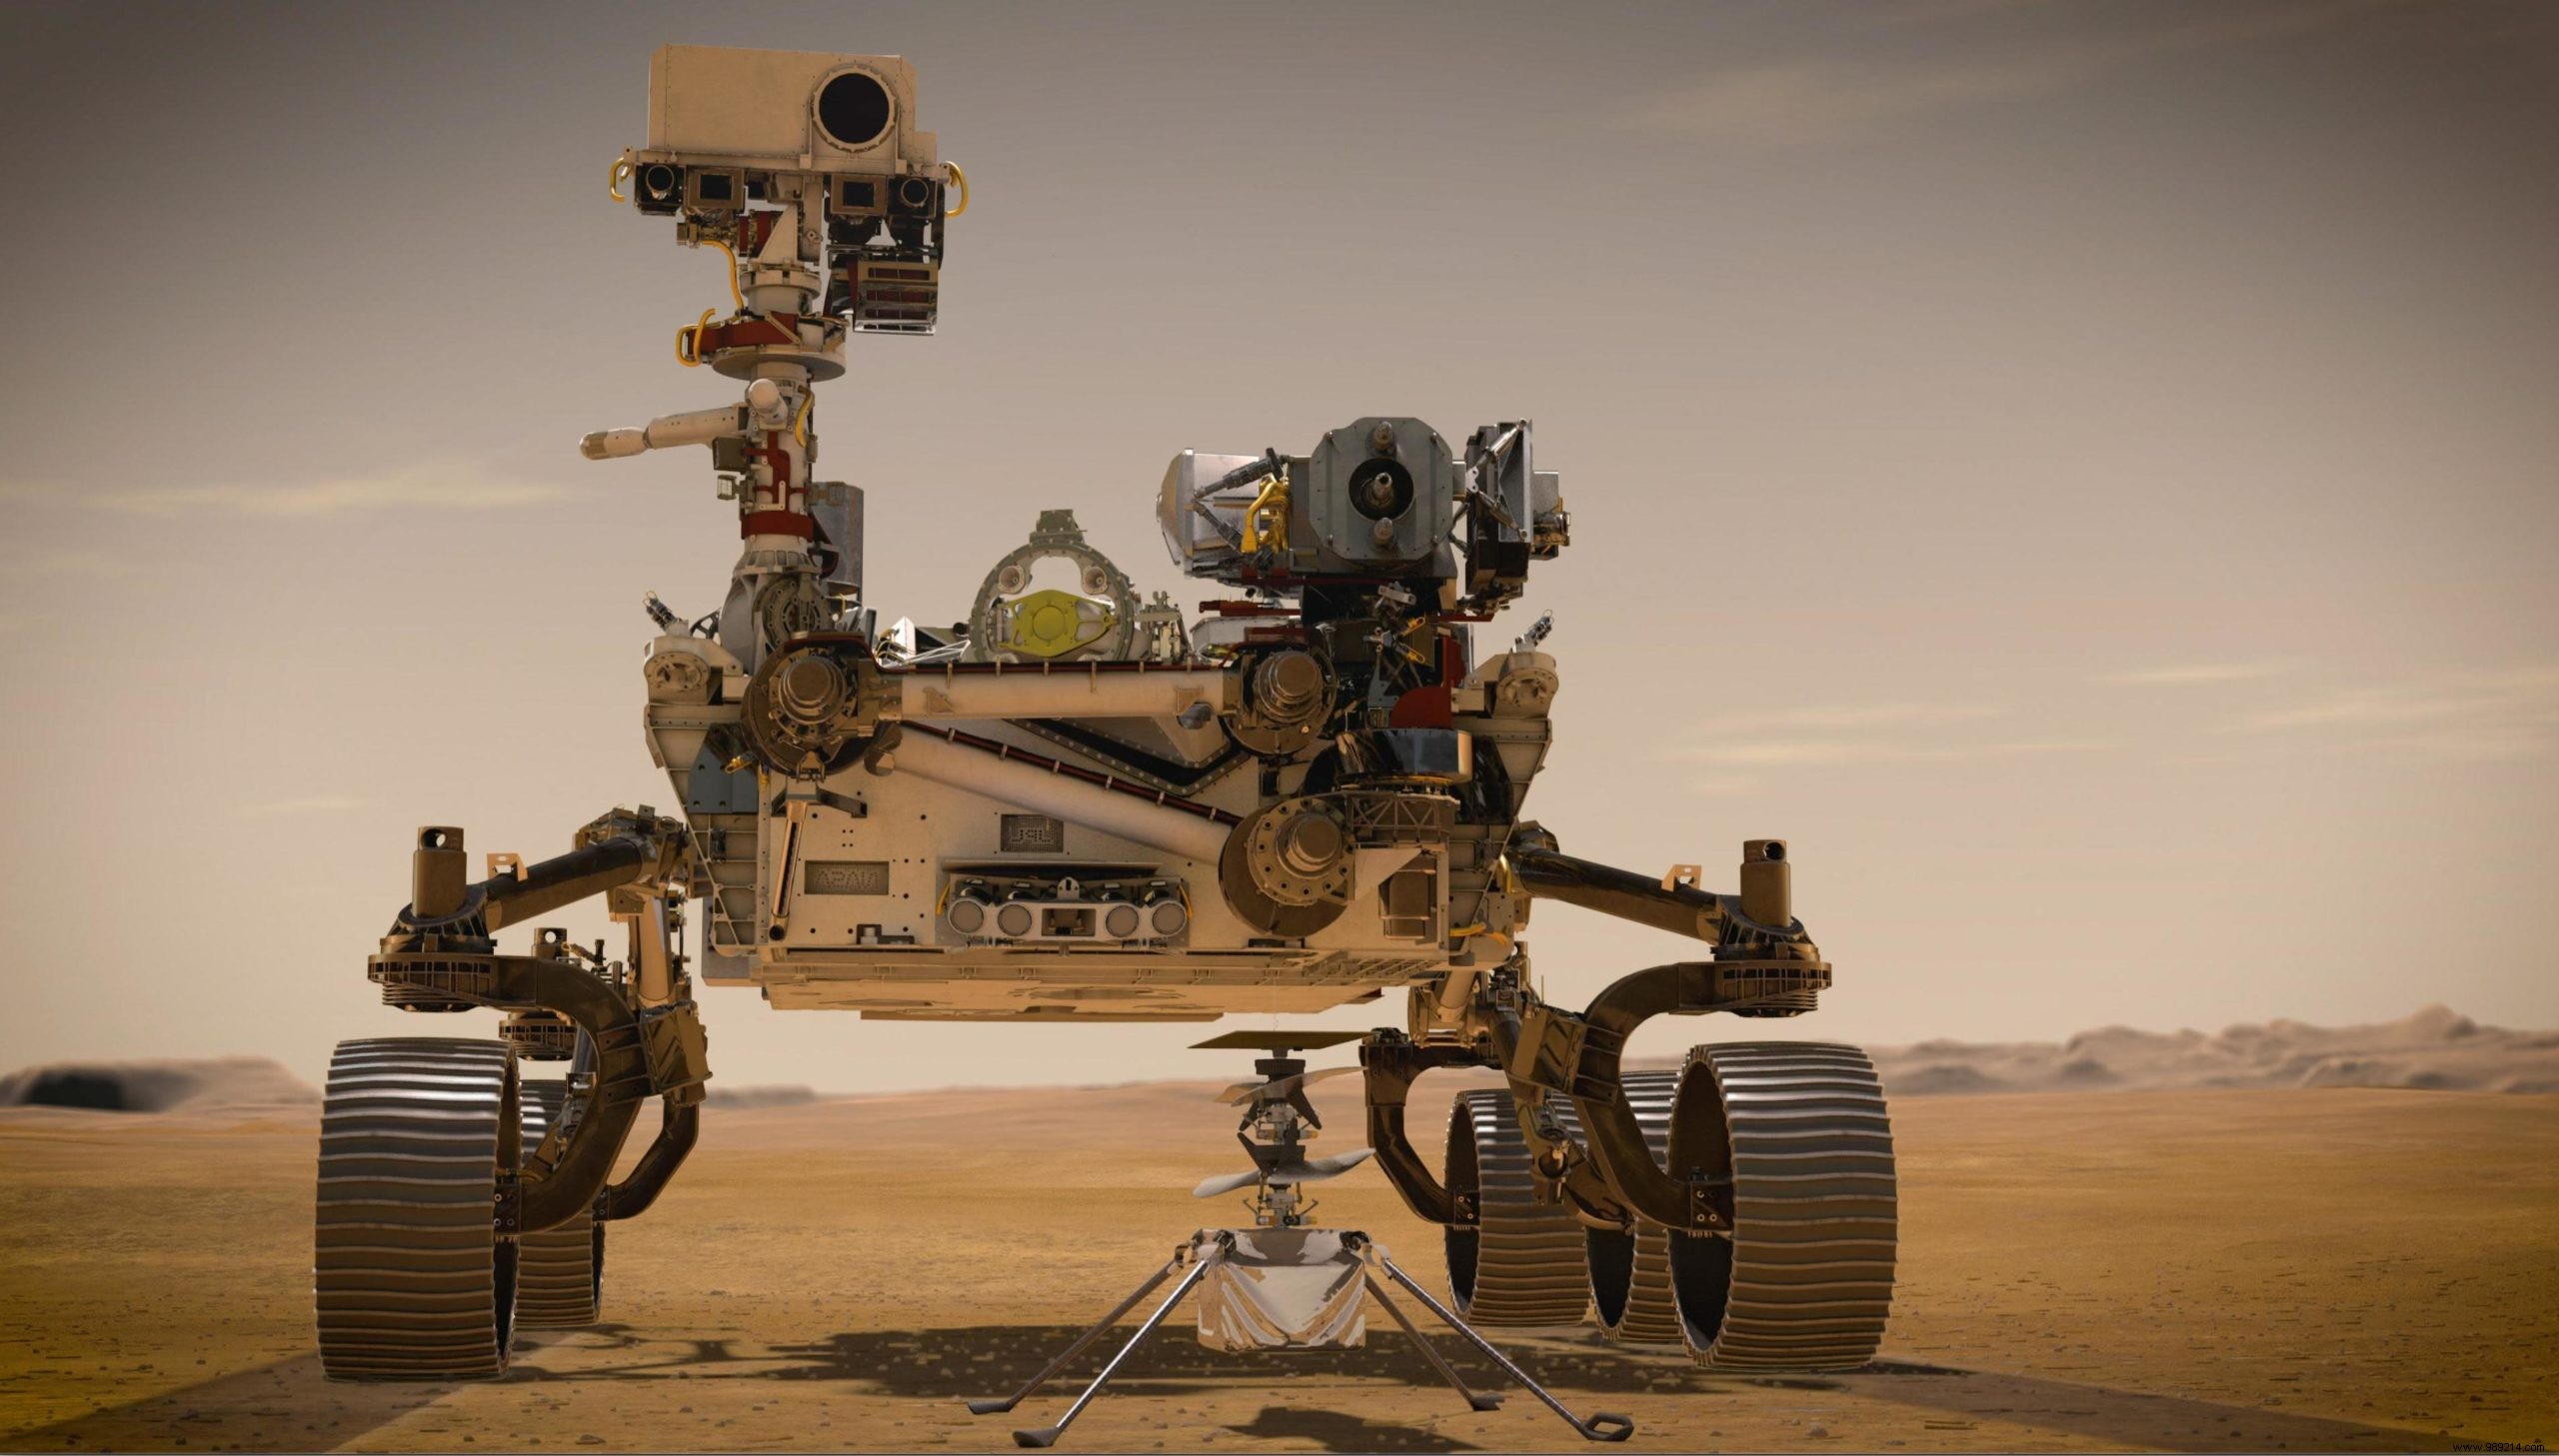 On Mars, Ingenuity prepares for a historic first flight 